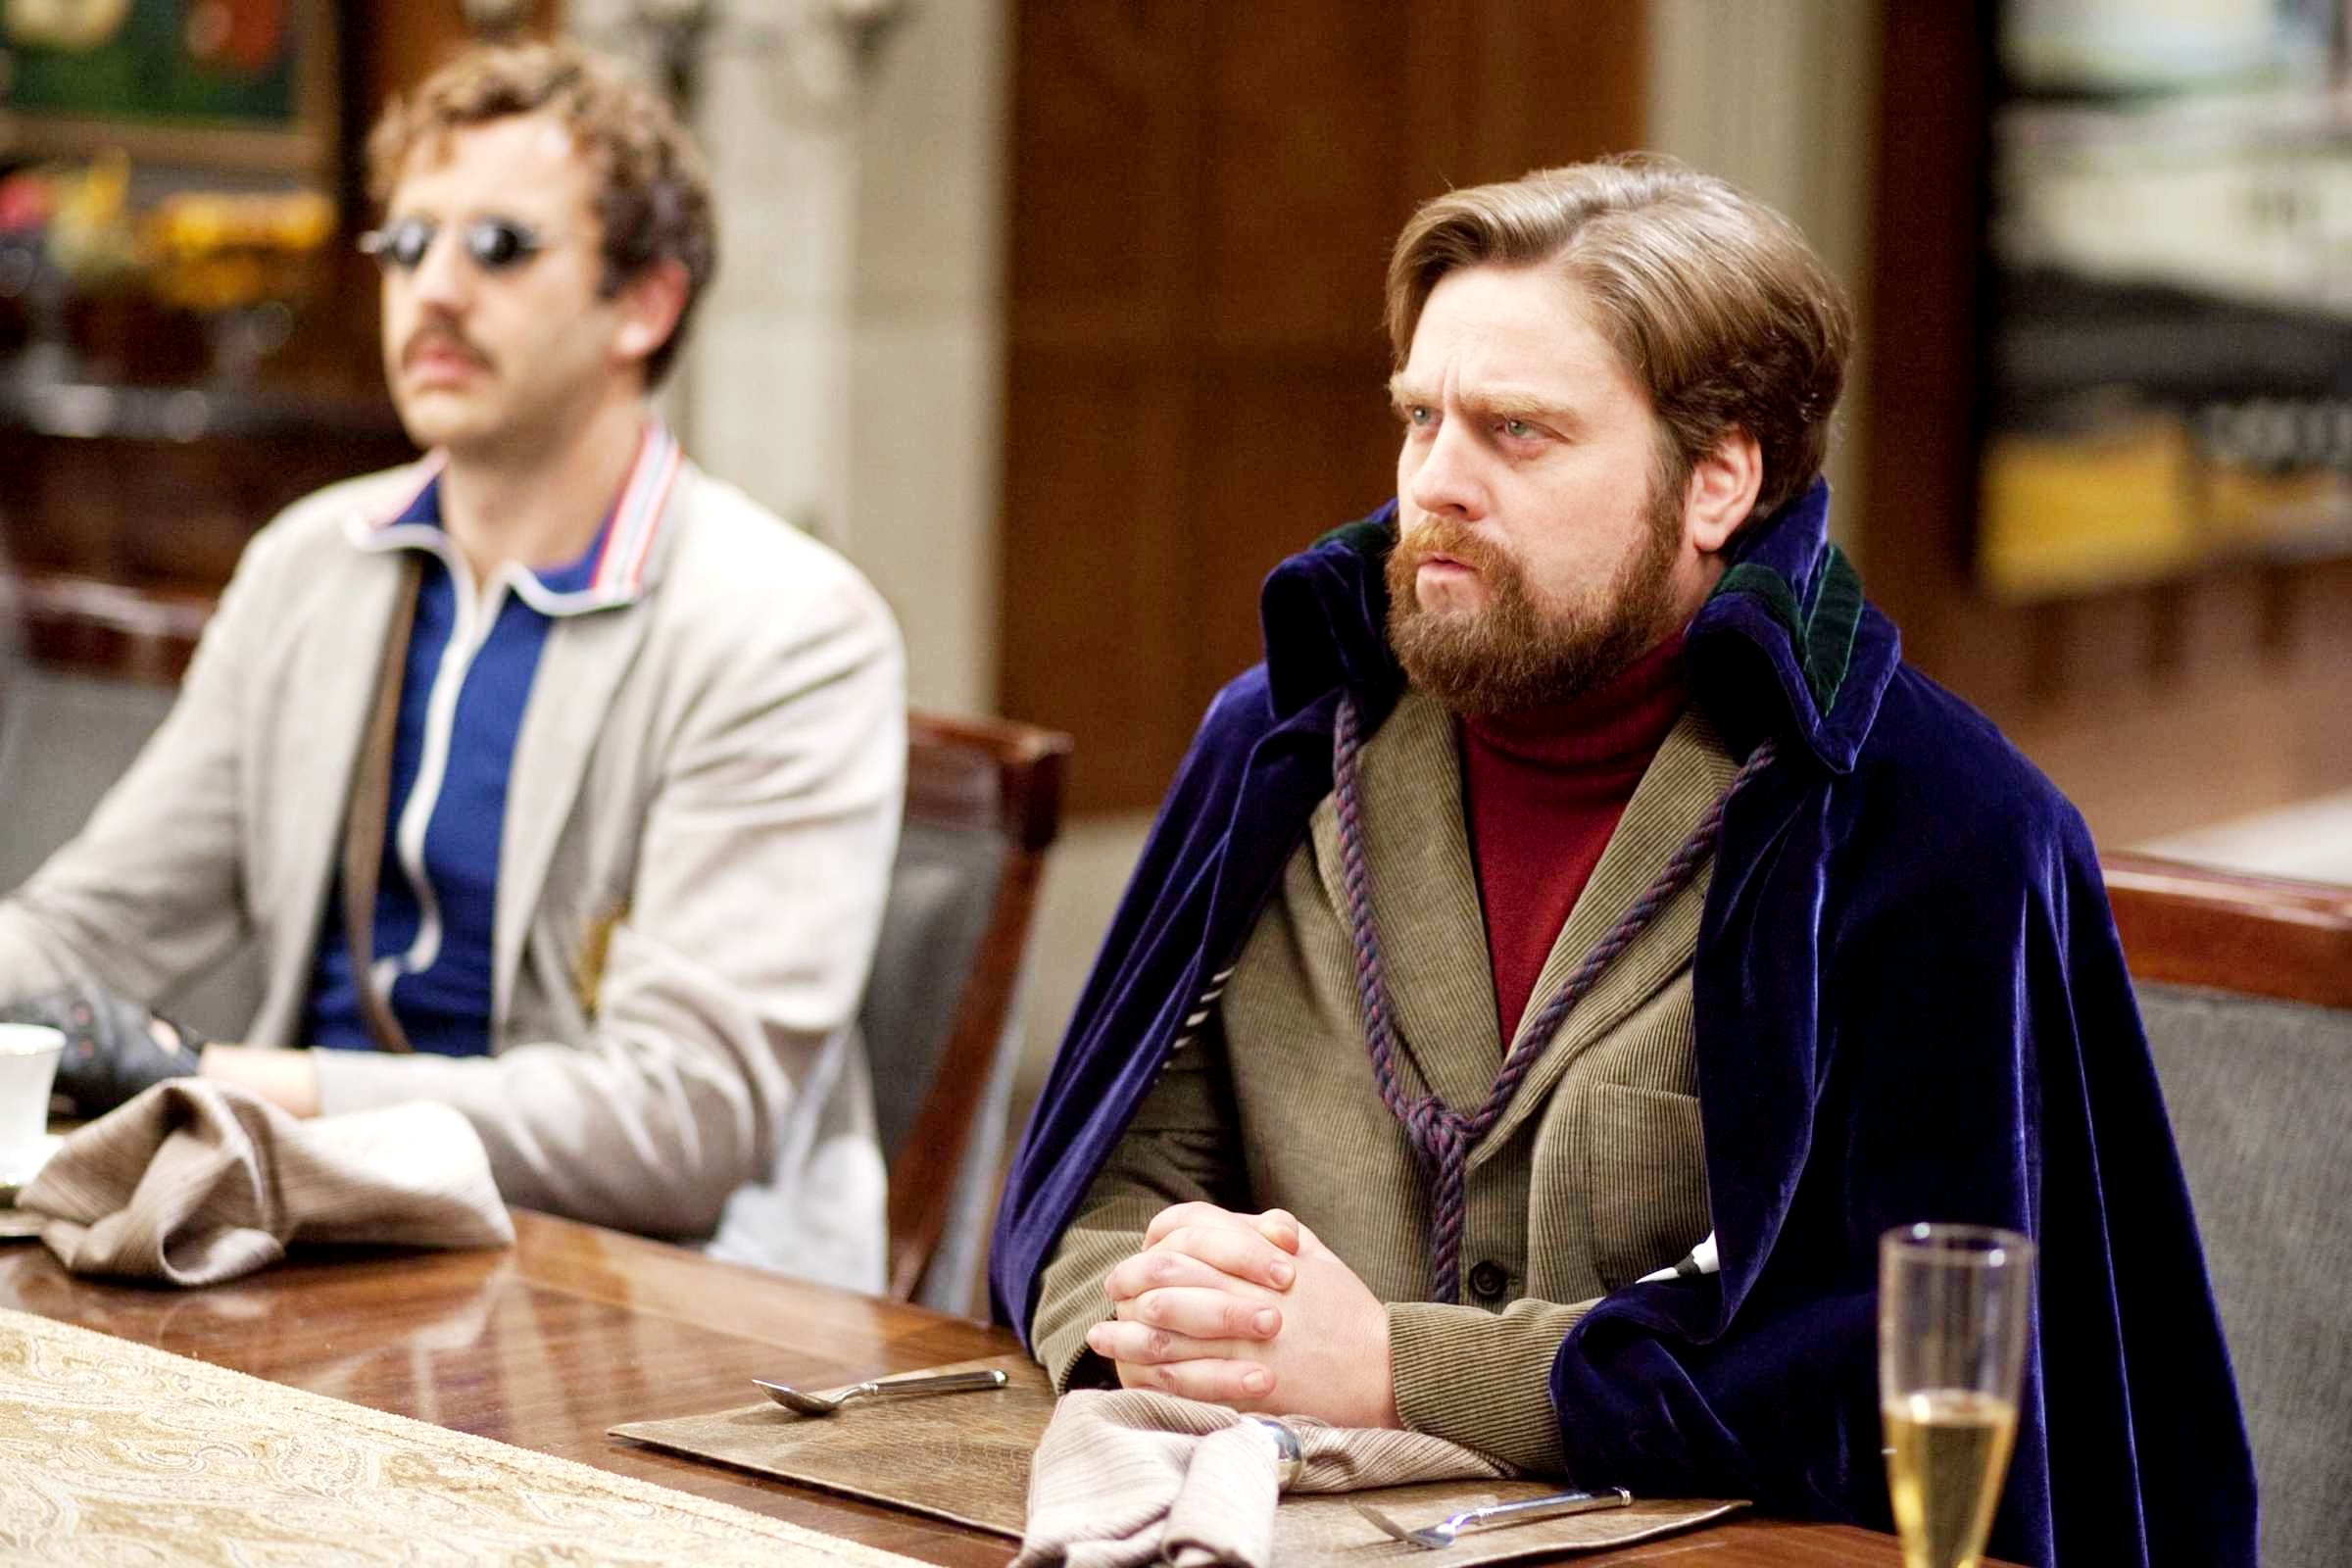 Chris O'Dowd stars as Marco Blind Swordsman and Zach Galifianakis stars as Therman in Paramount Pictures' Dinner for Schmucks (2010). Photo by Merie Weismiller Wallace